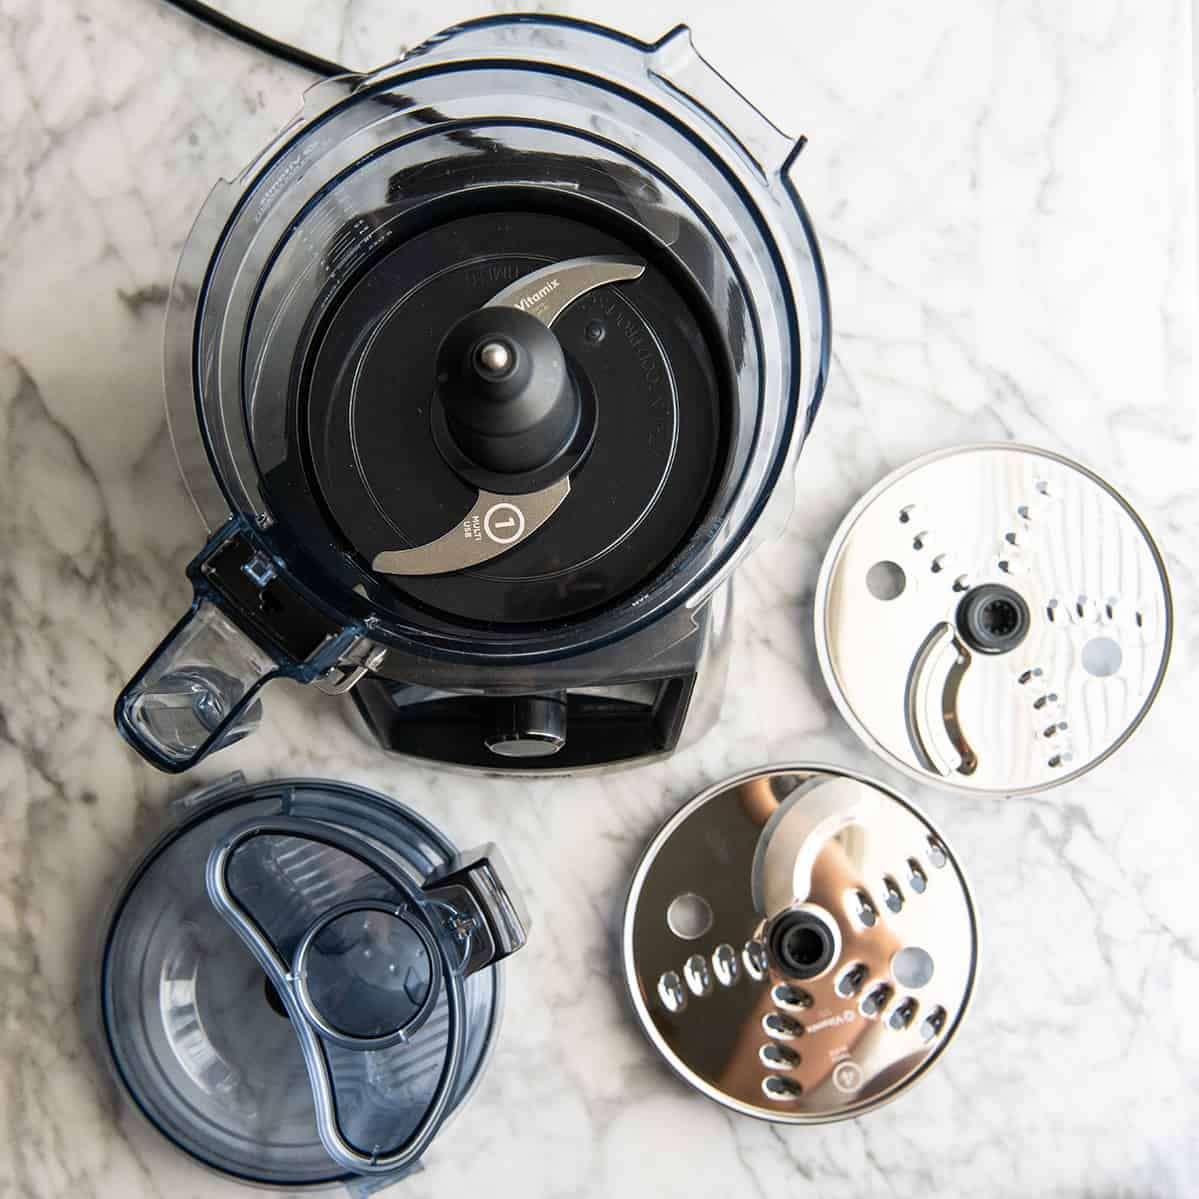 Overhead view of the Vitamix food processor with the multi-use blade attached and the other discs around it